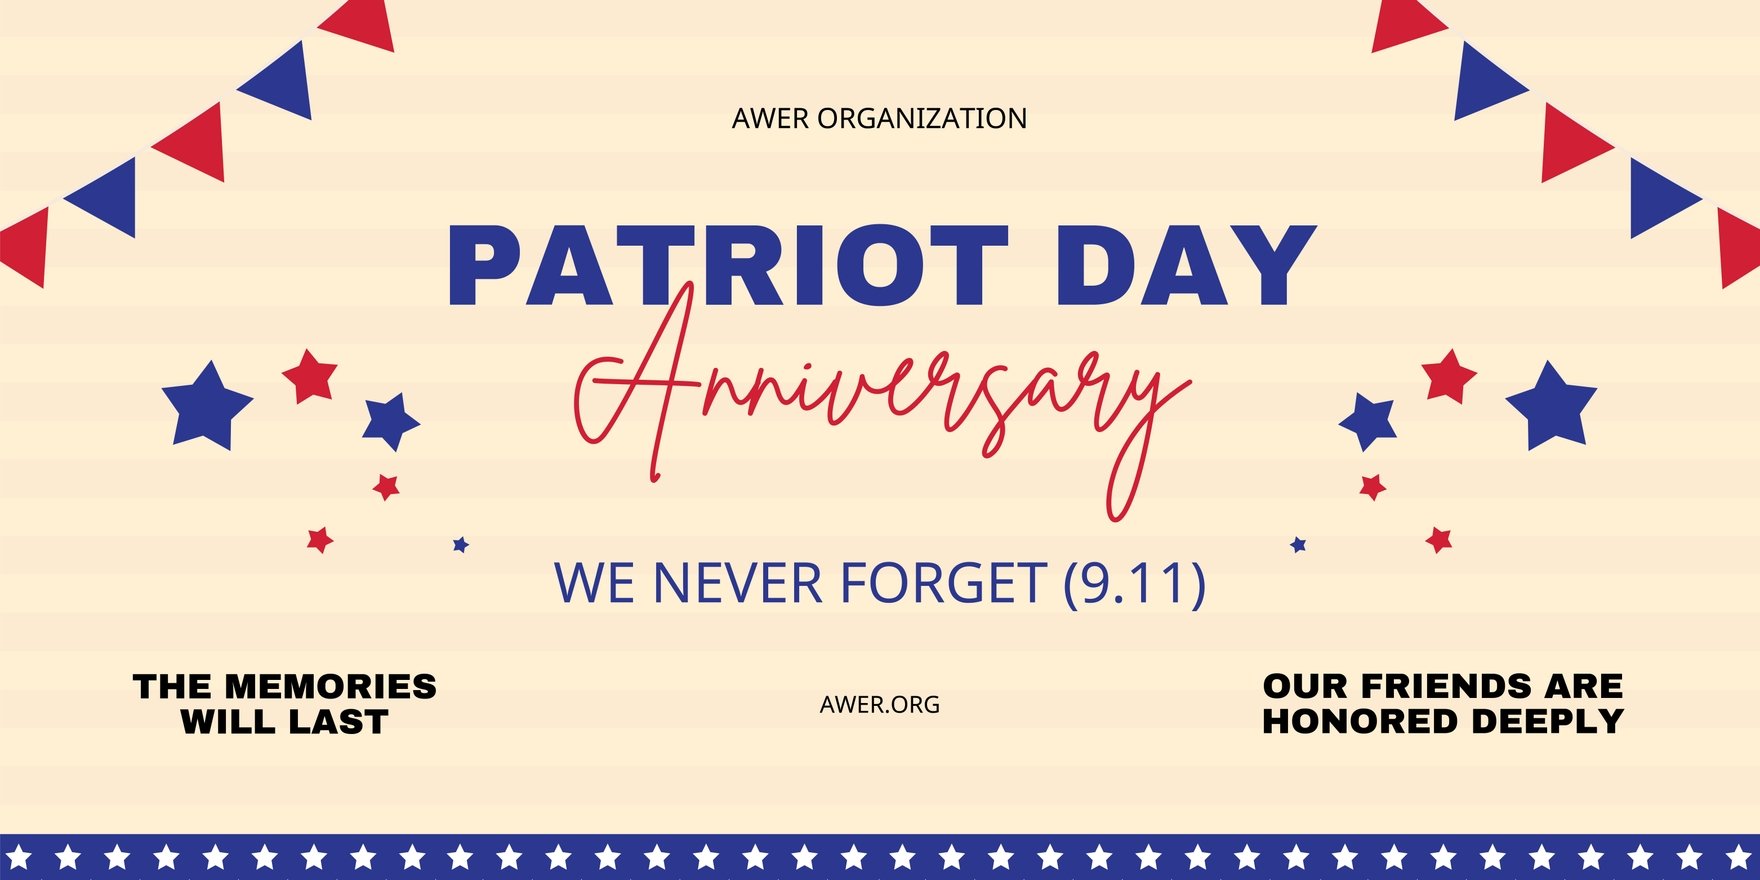 Free Patriot Day Never Forget 911 Anniversary Banner in Word, Google Docs, Illustrator, PSD, Apple Pages, Publisher